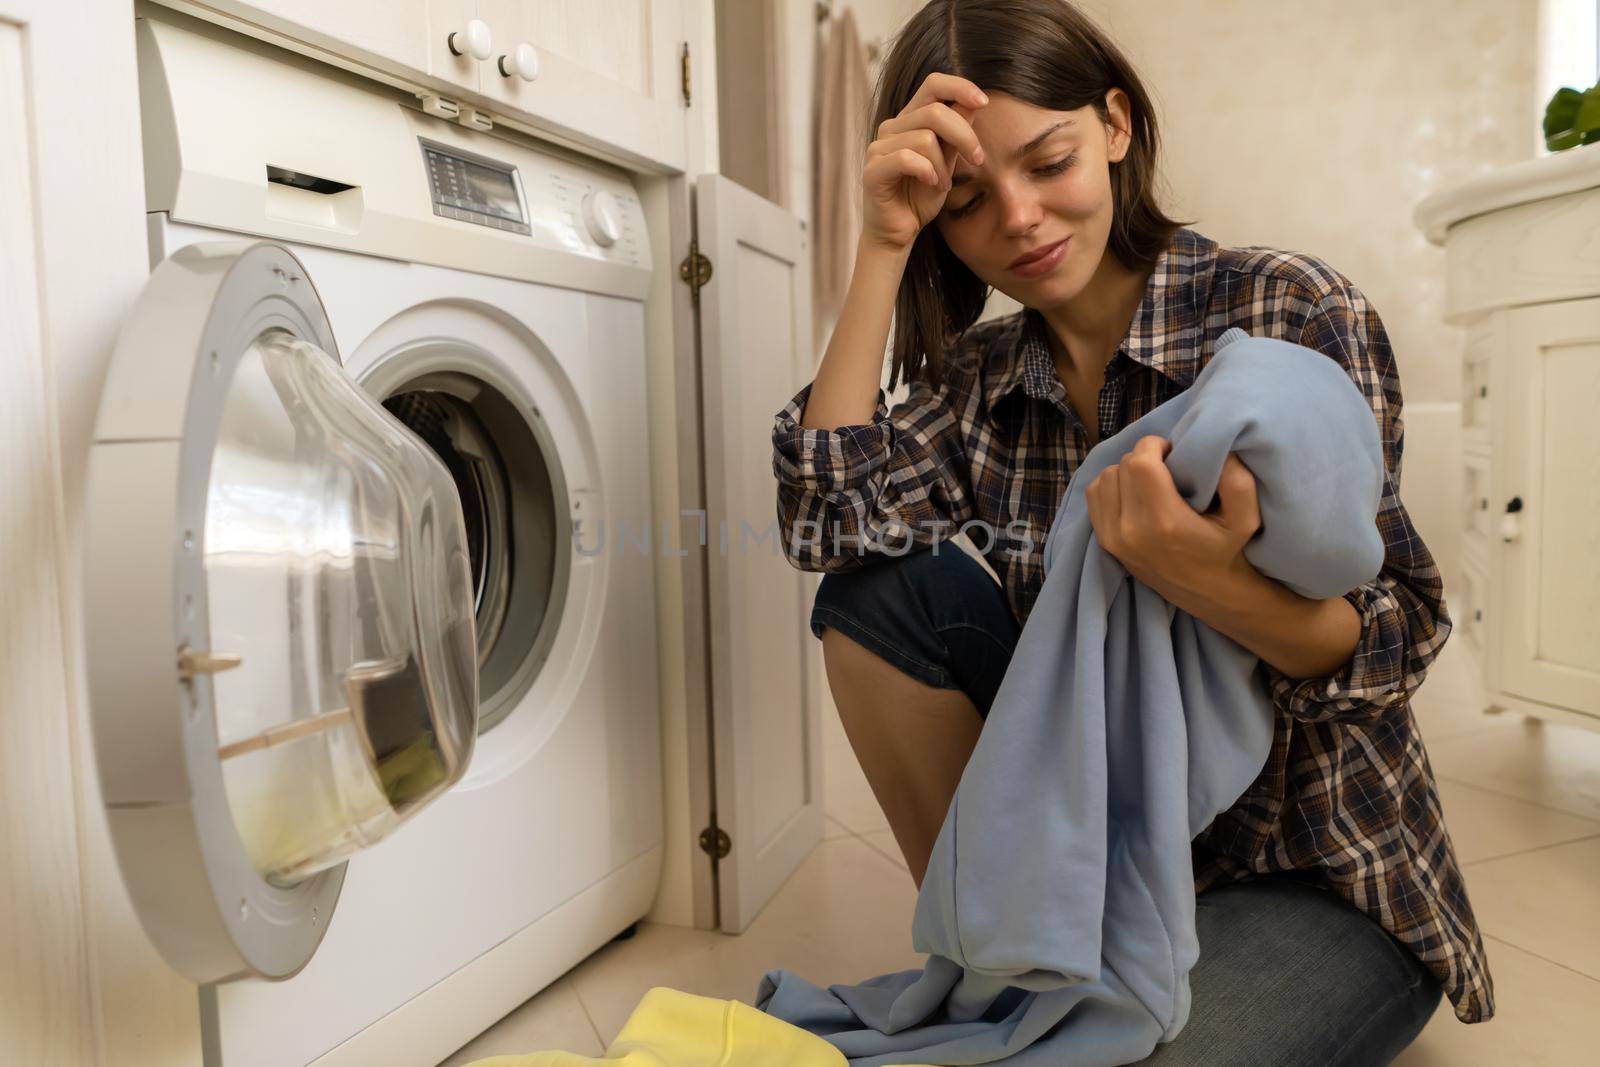 A young girl puts things in the washing machine, a tired woman sits on the floor of a cozy house and looks at the stain on her jacket, which needs to be removed with detergent.